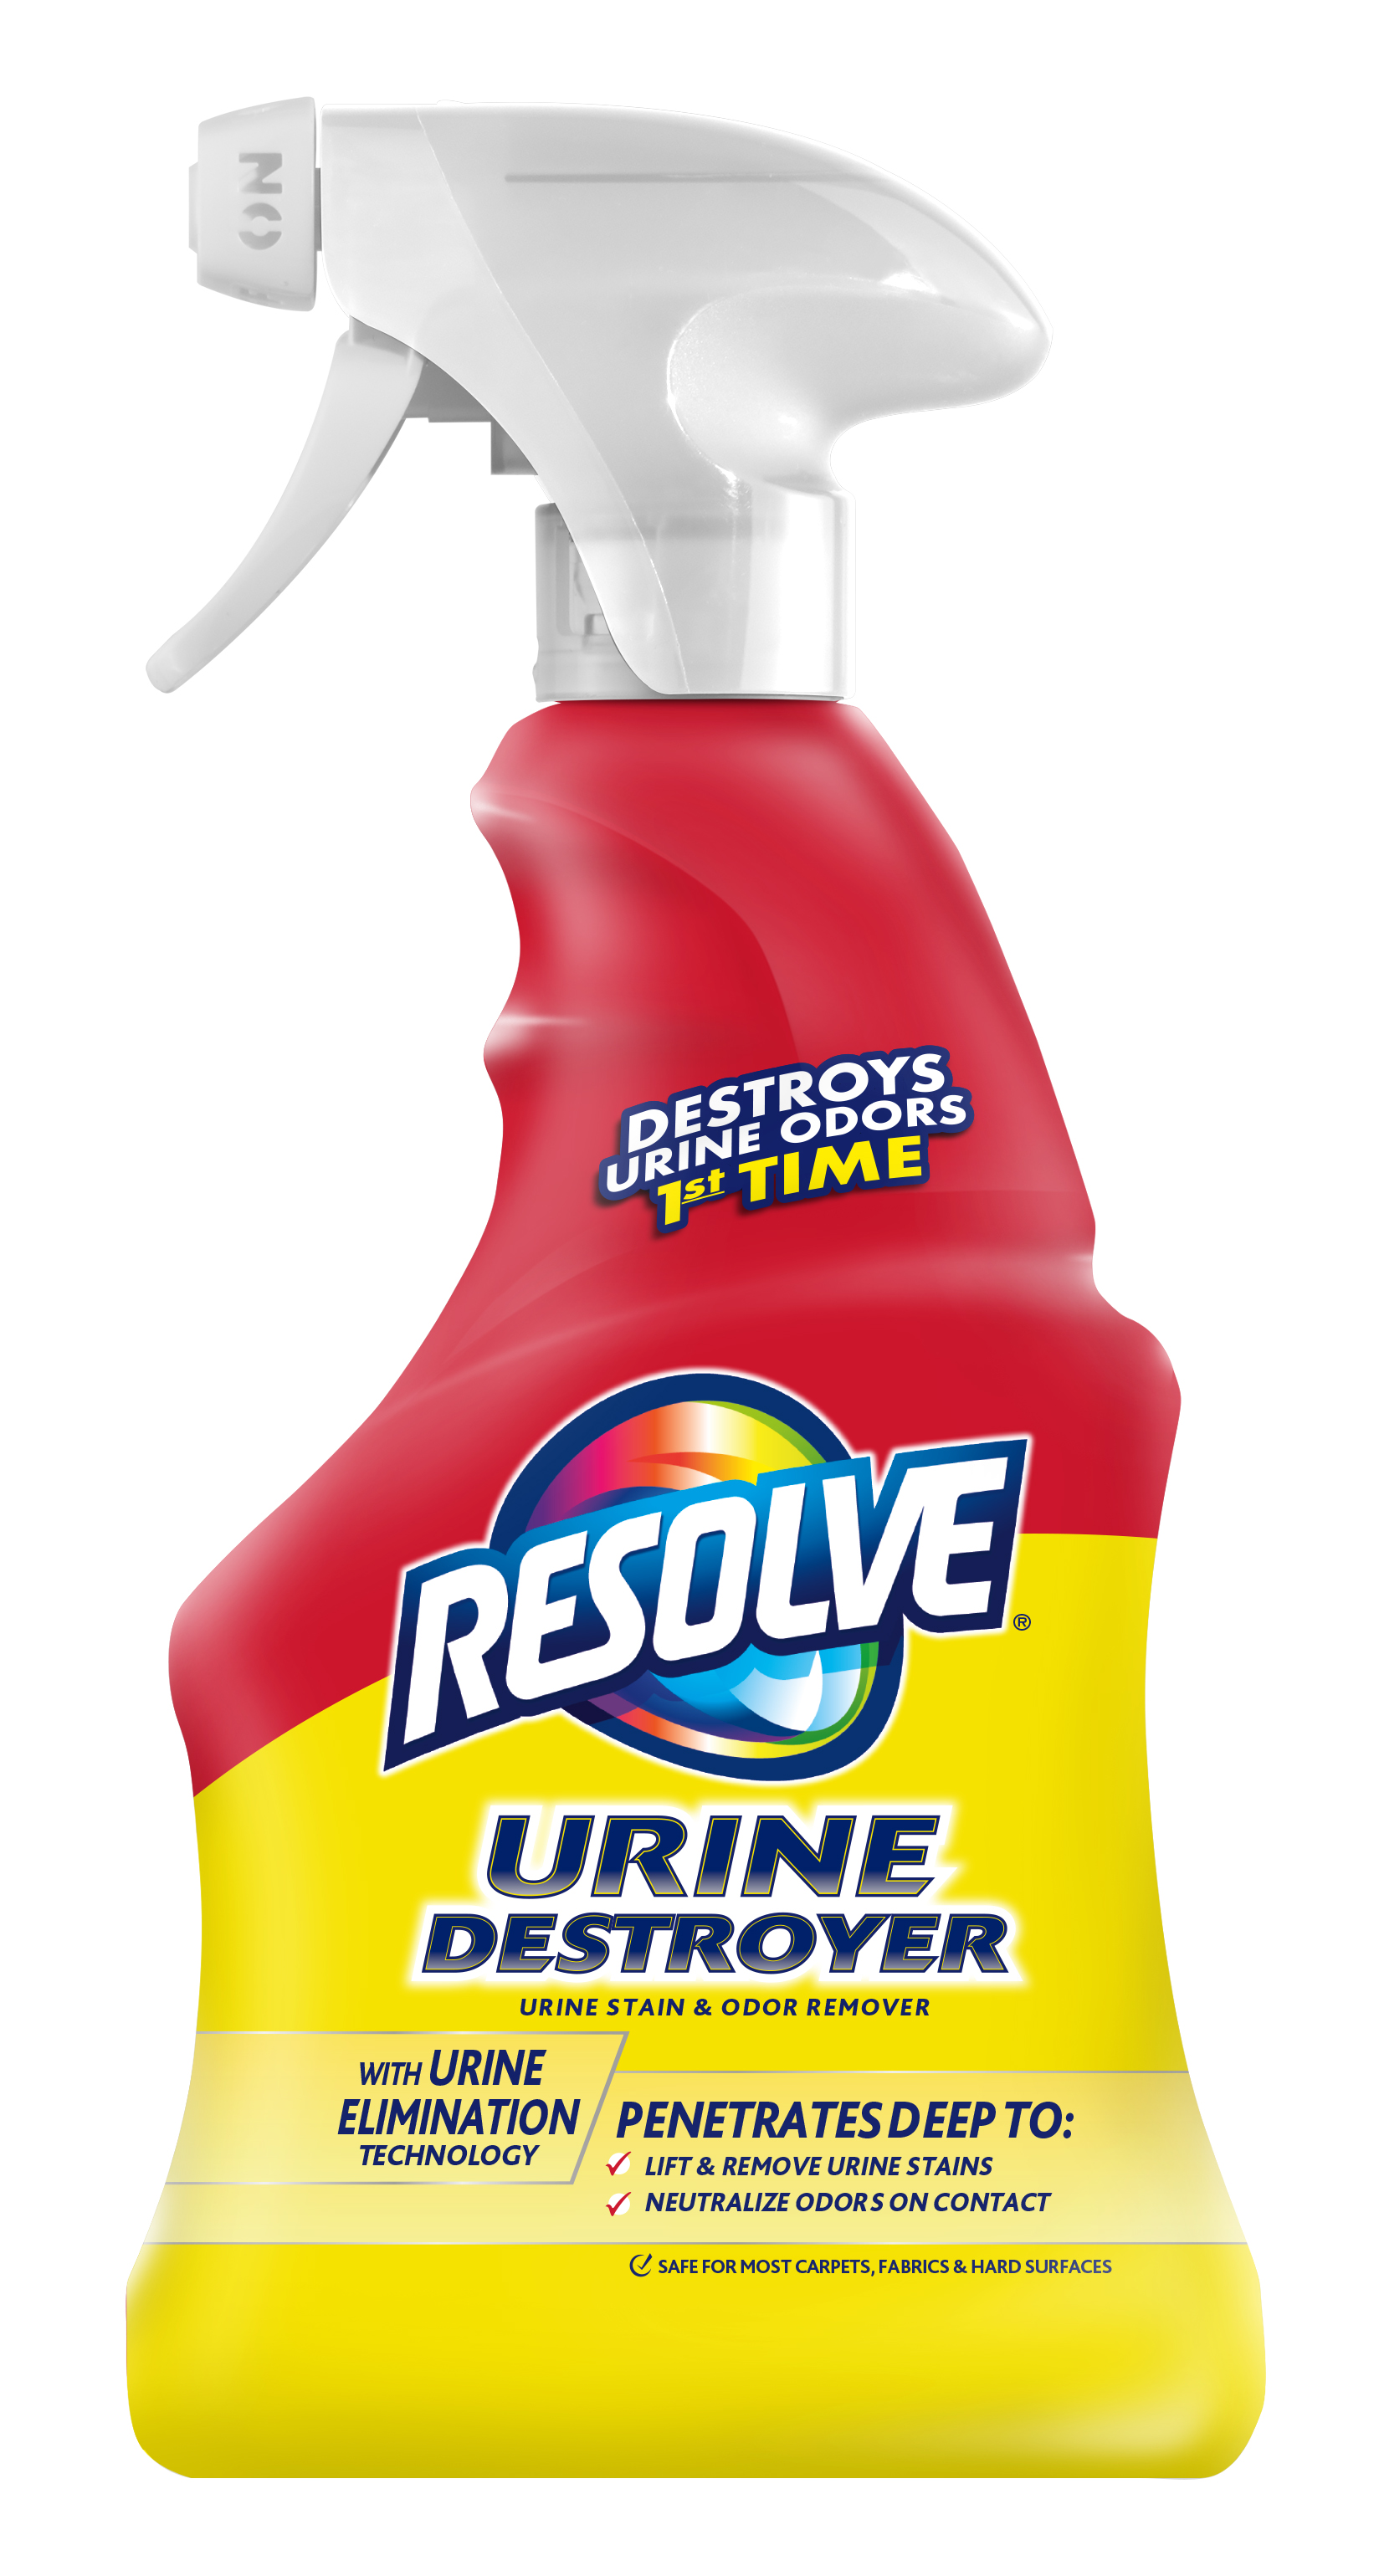 Resolve Spot Stain Remover Multi-Fabric Upholstery Cleaner Spray (22 fl oz)  X2